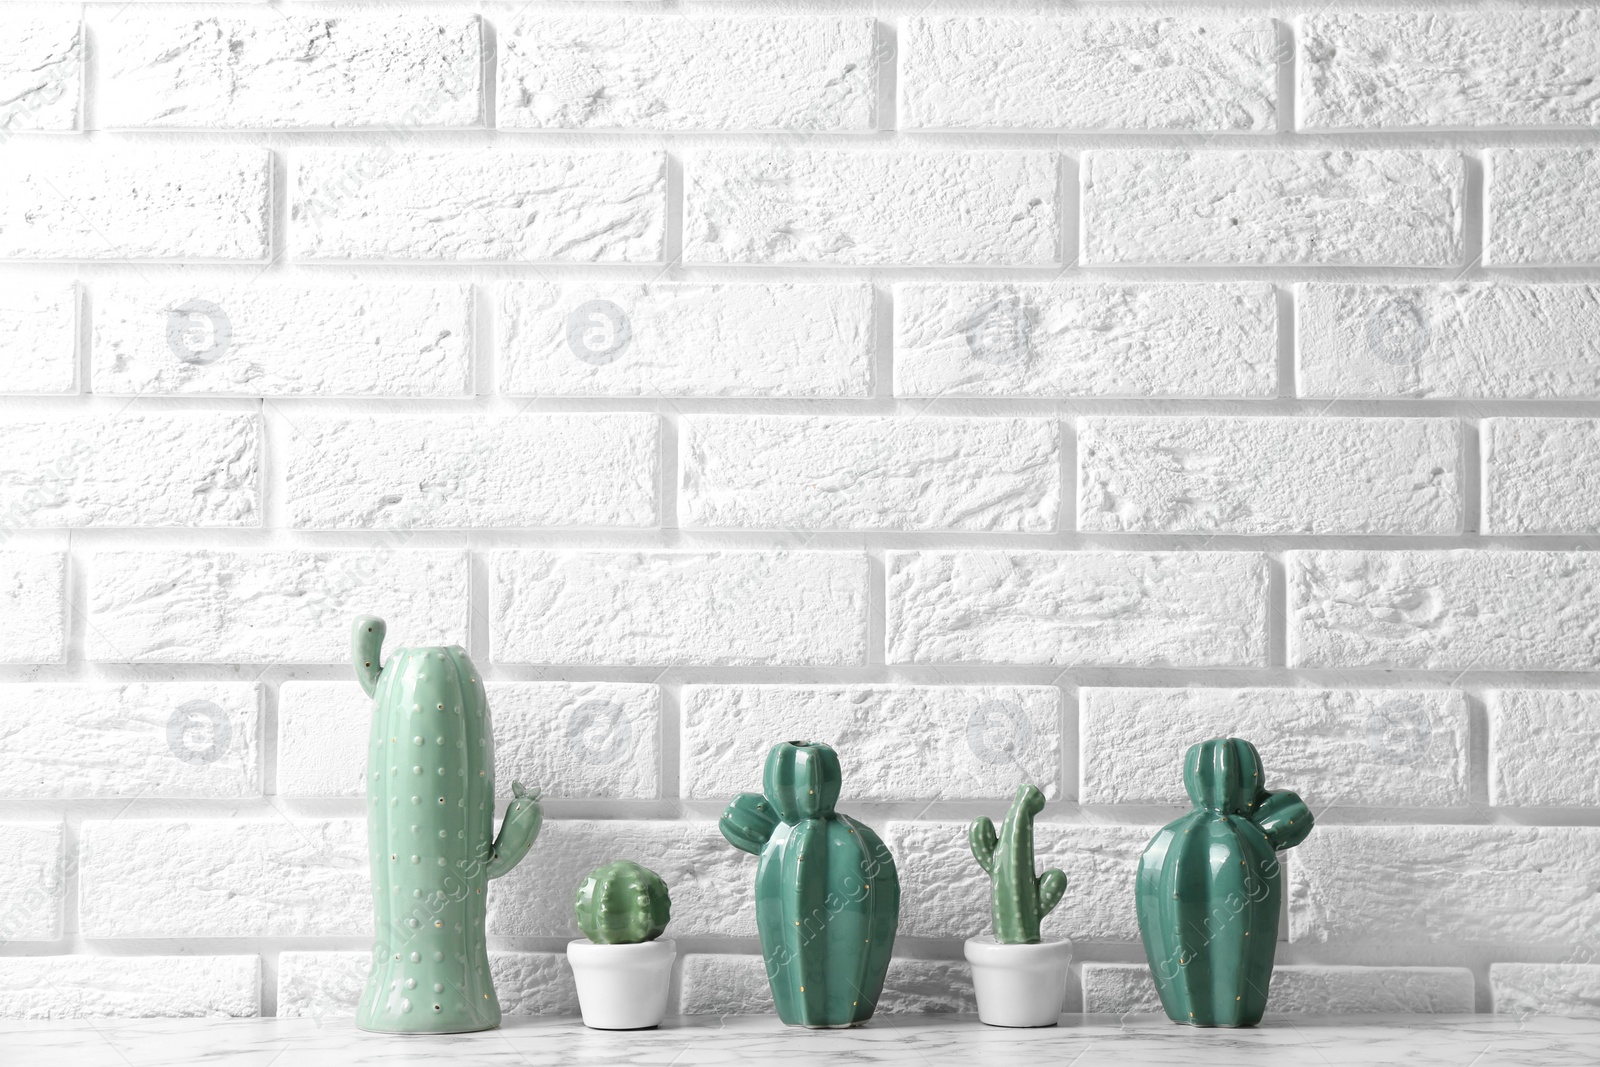 Photo of Decorative cacti on table near brick wall, space for text. Interior decor